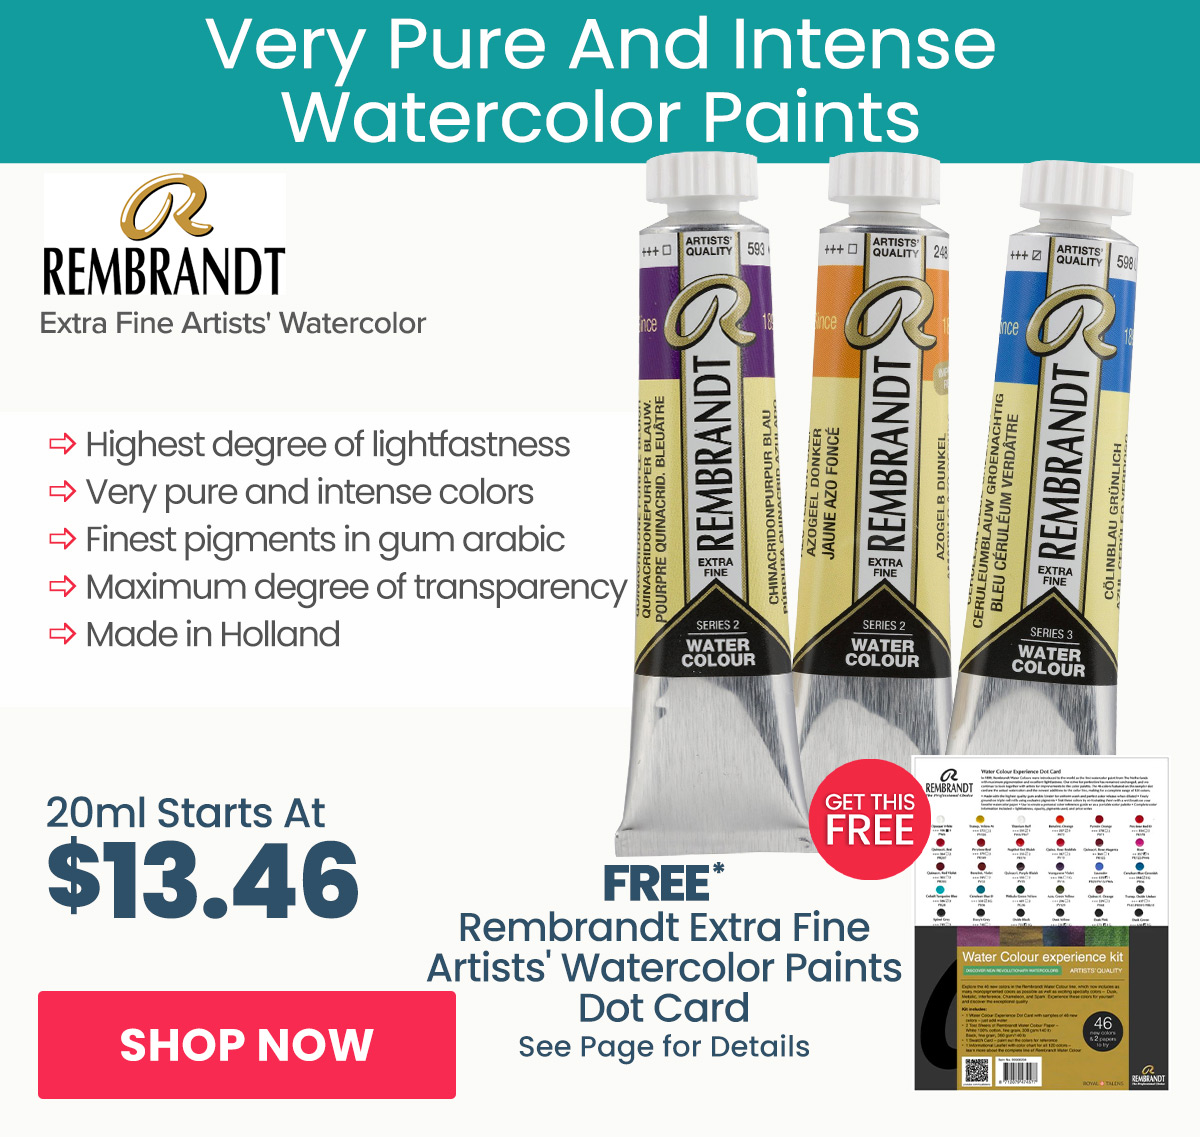 Free Gift with Purchase - Rembrandt Extra Fine Artists' Watercolor Paints